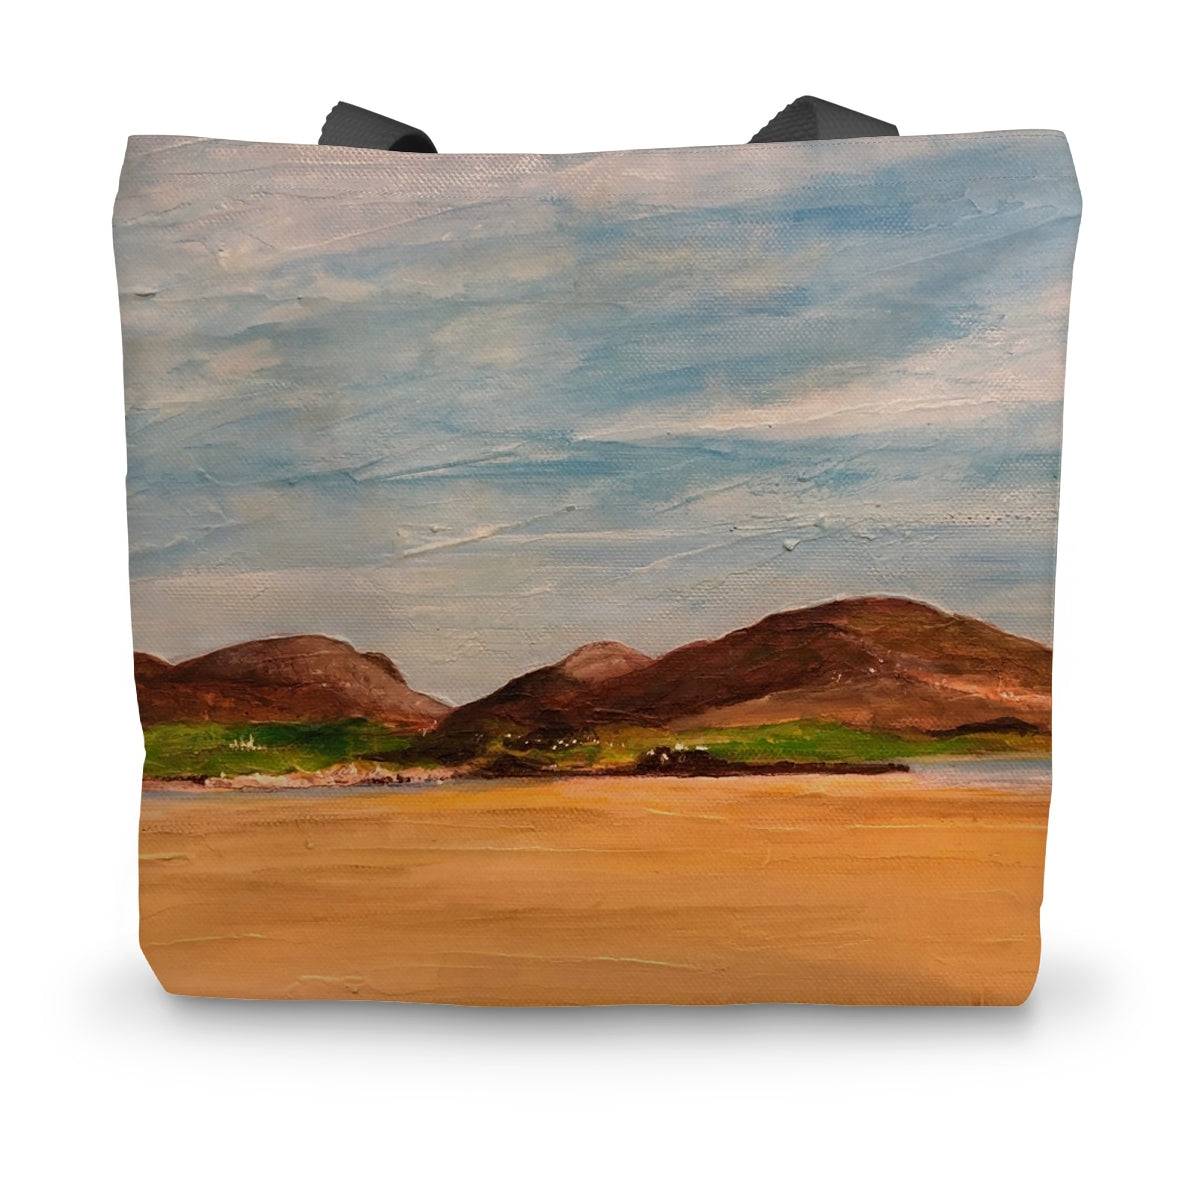 Uig Sands Lewis Art Gifts Canvas Tote Bag-Bags-Hebridean Islands Art Gallery-14"x18.5"-Paintings, Prints, Homeware, Art Gifts From Scotland By Scottish Artist Kevin Hunter